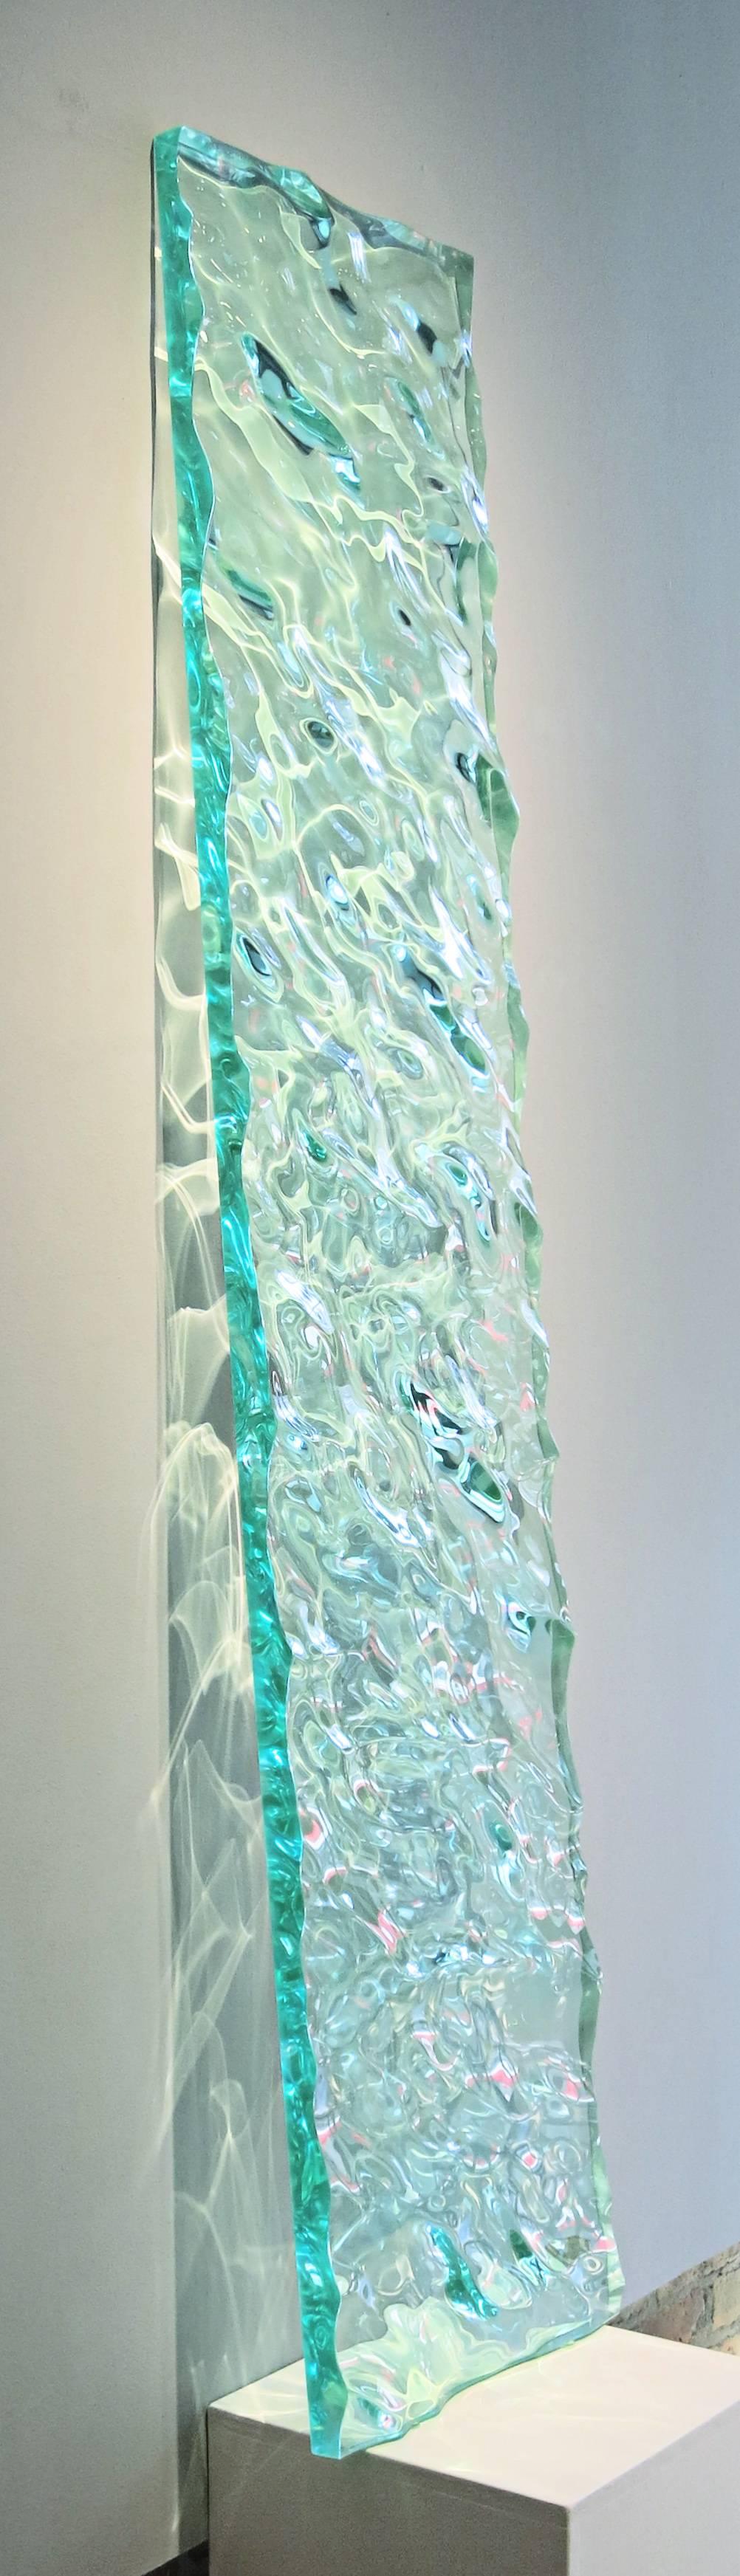 Sophia Collier Abstract Sculpture - Sea Change